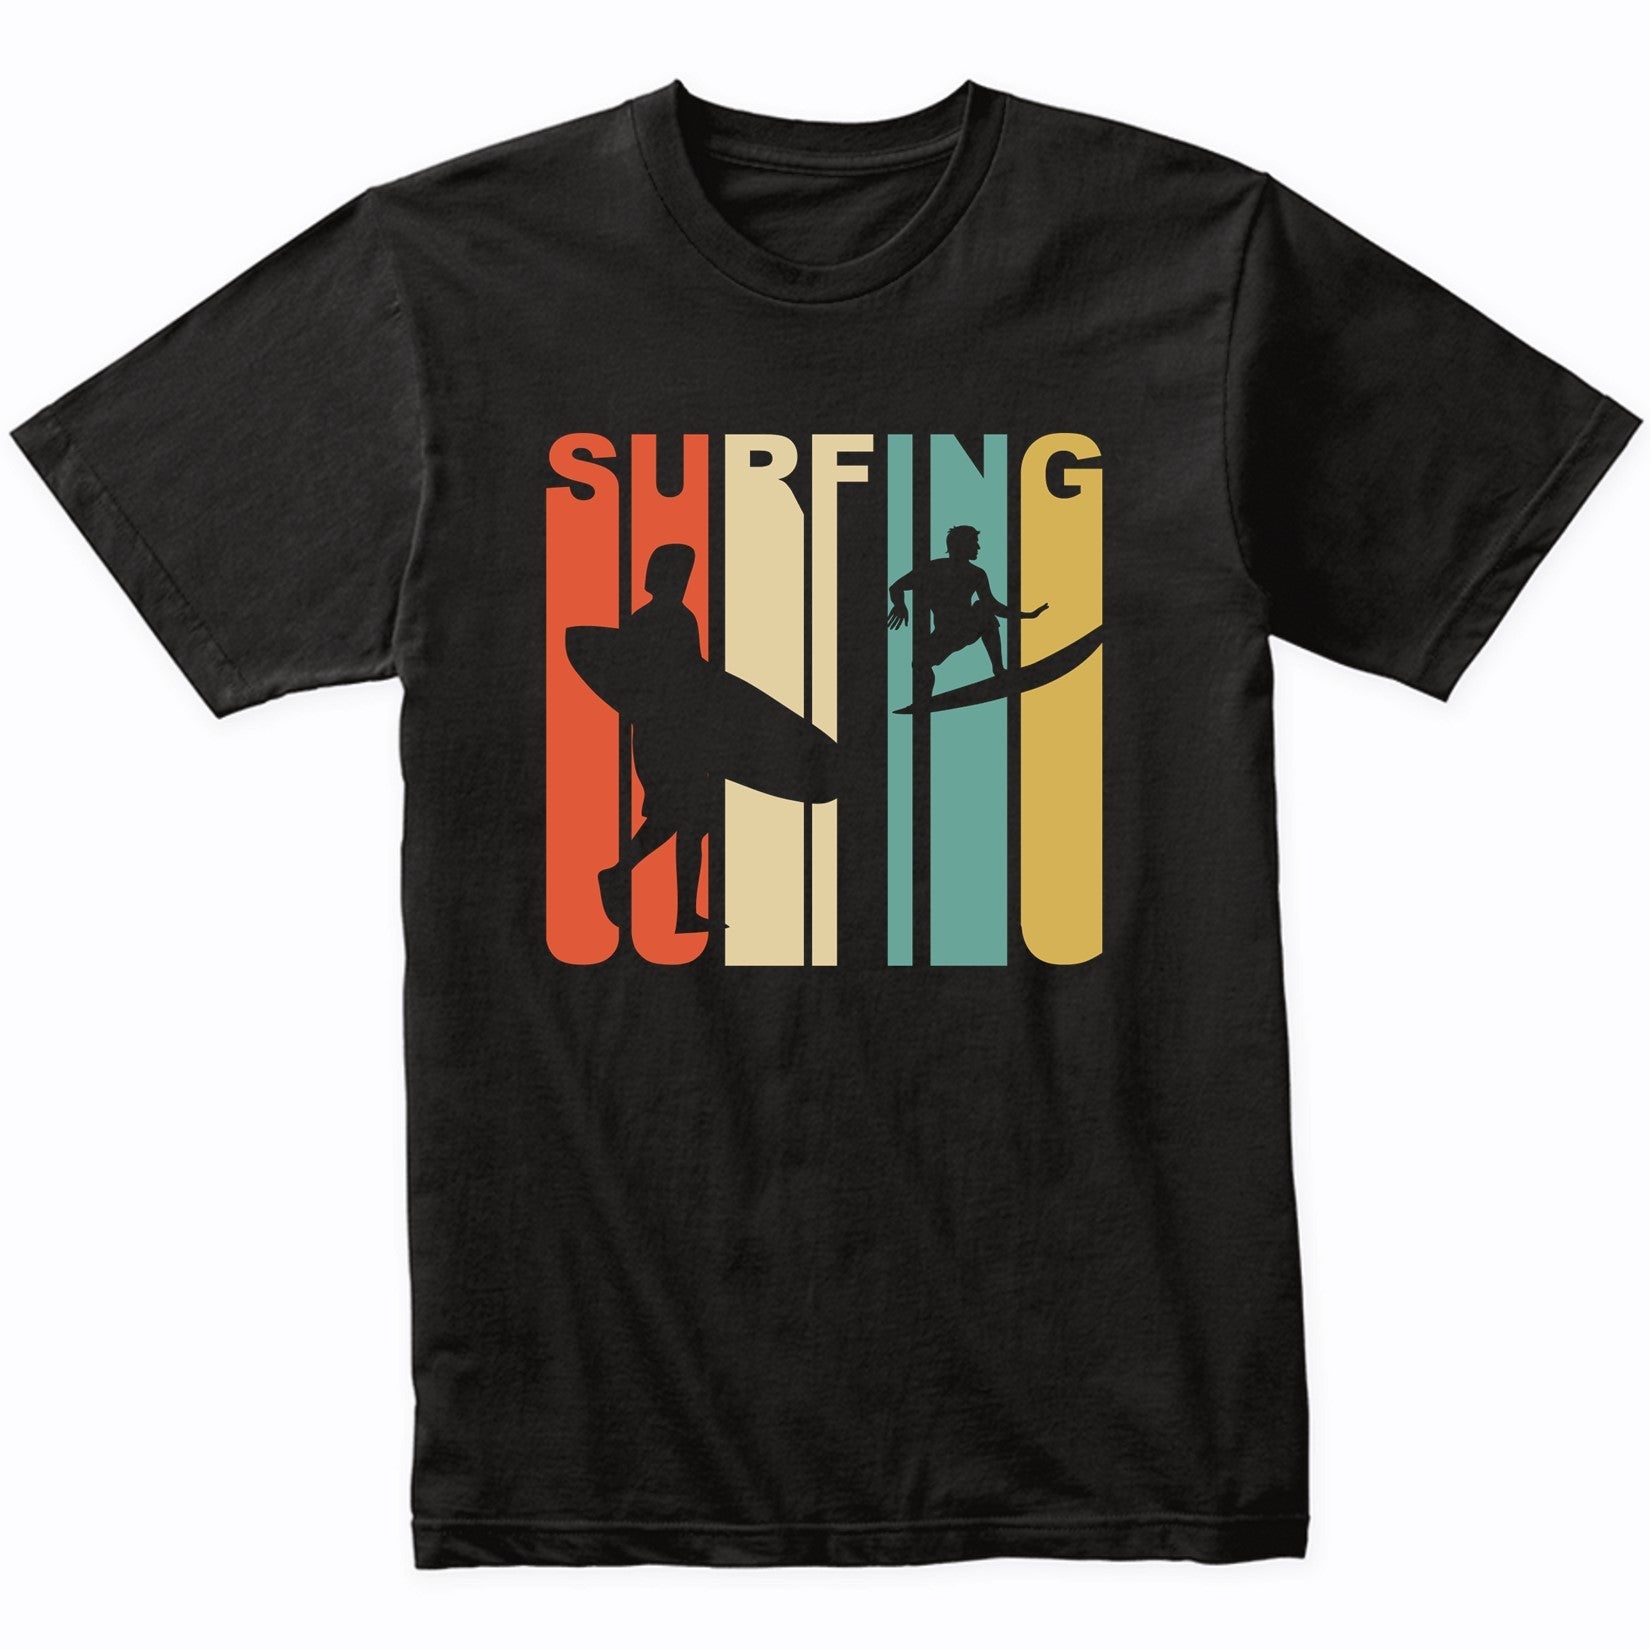 Retro 1970's Style Surfer Silhouette Surfing T-Shirt